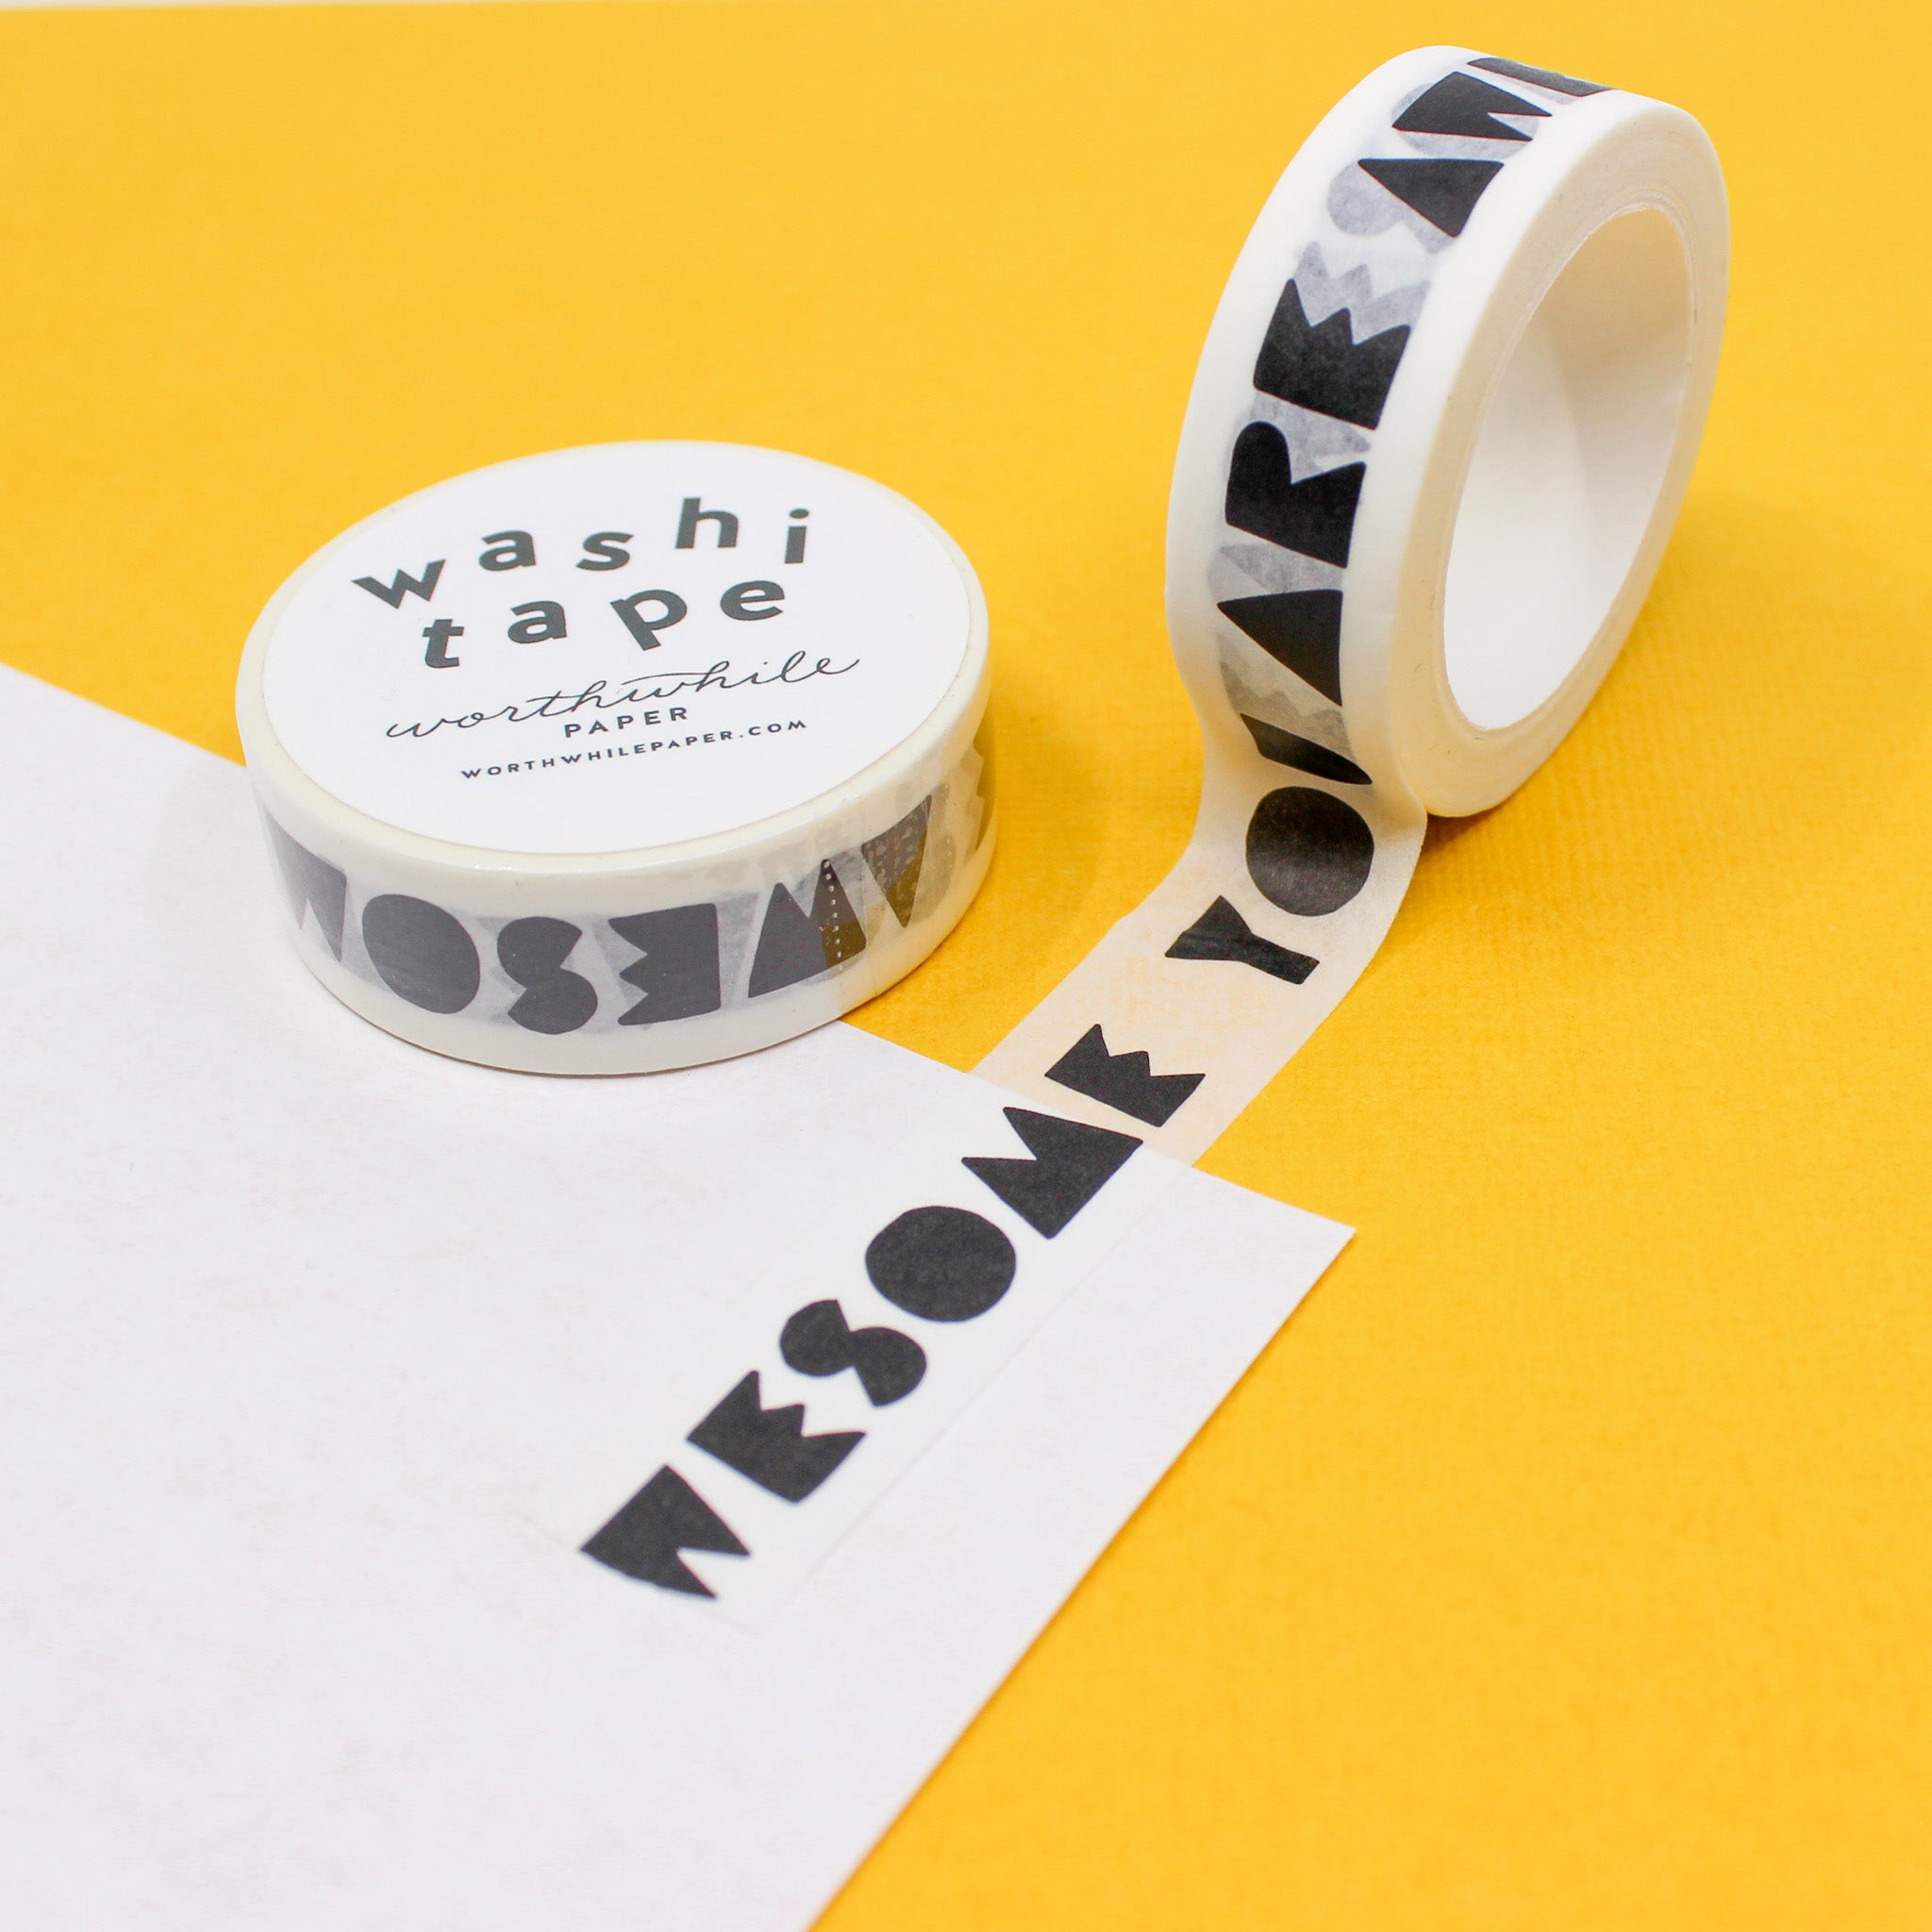 This is a You are awesome phrase pattern washi tape from BBB Supplies Craft Shop